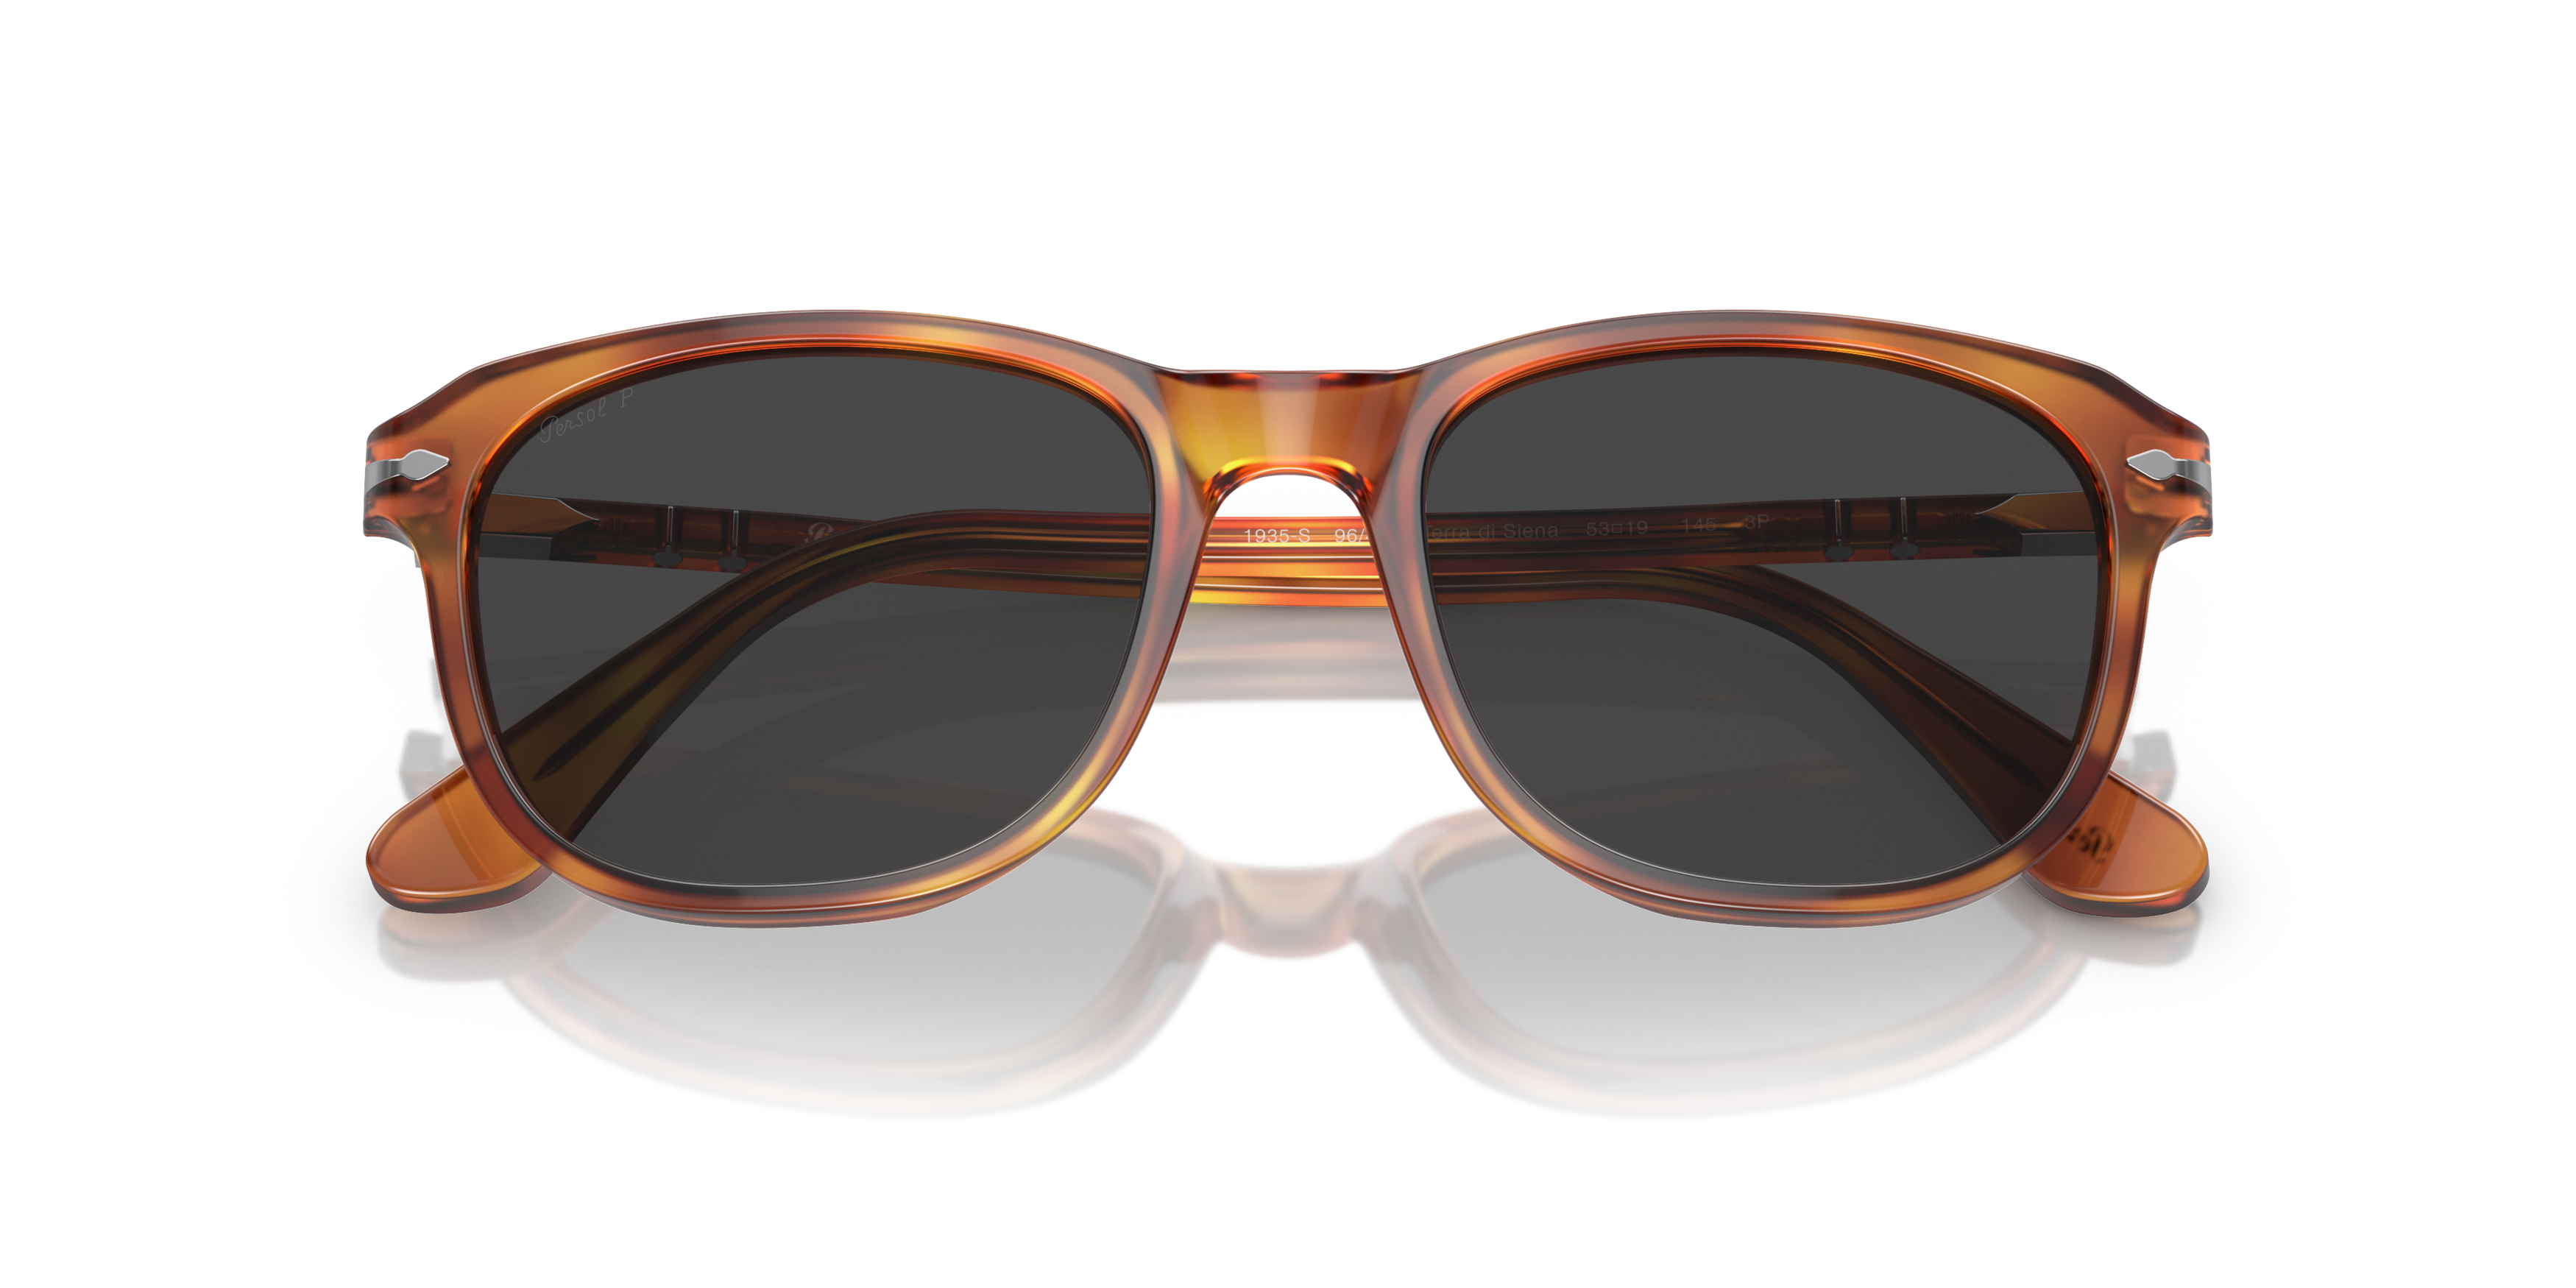 [products.image.folded] Persol 0PO1935S 96/48